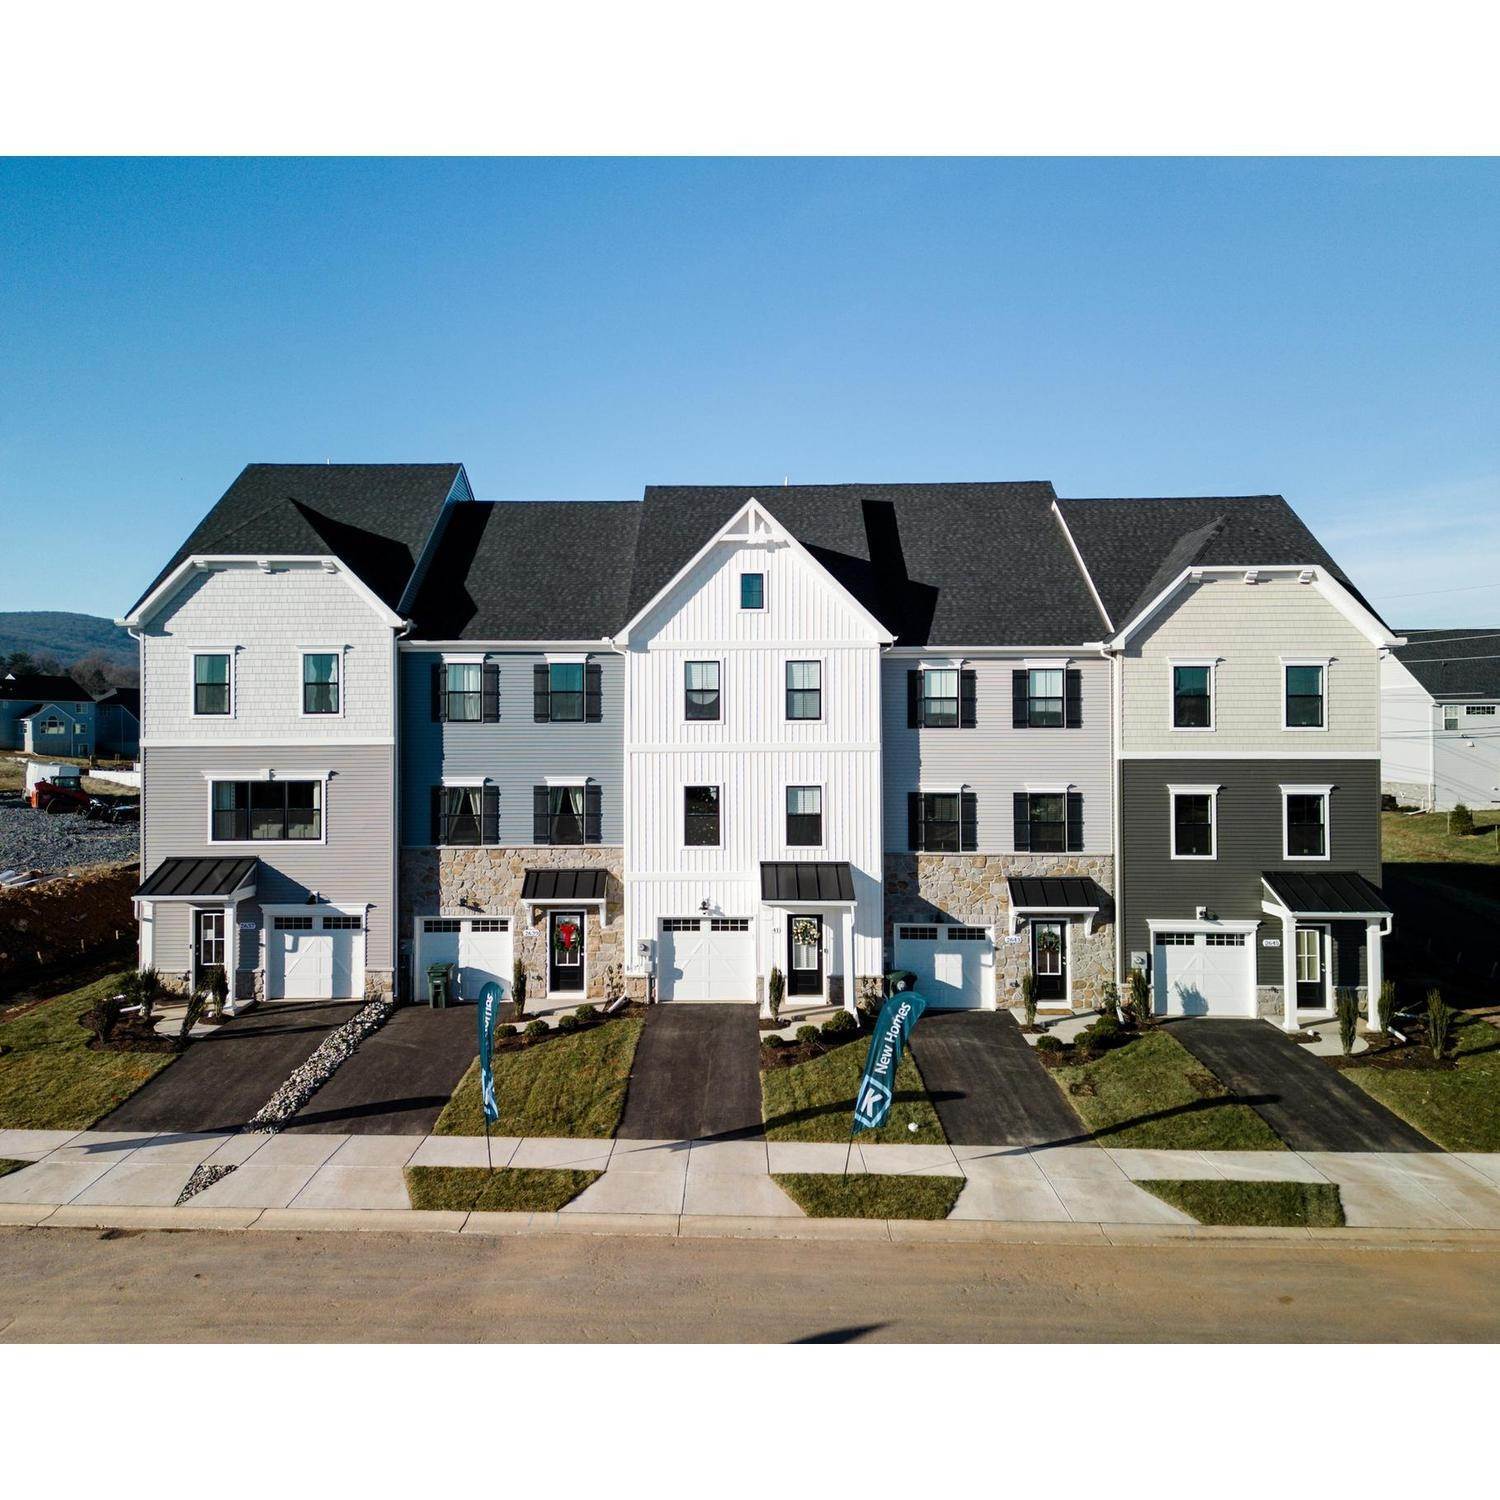 12. Kellerton Townhomes building at 1135 Futurity Street, Frederick, MD 21702